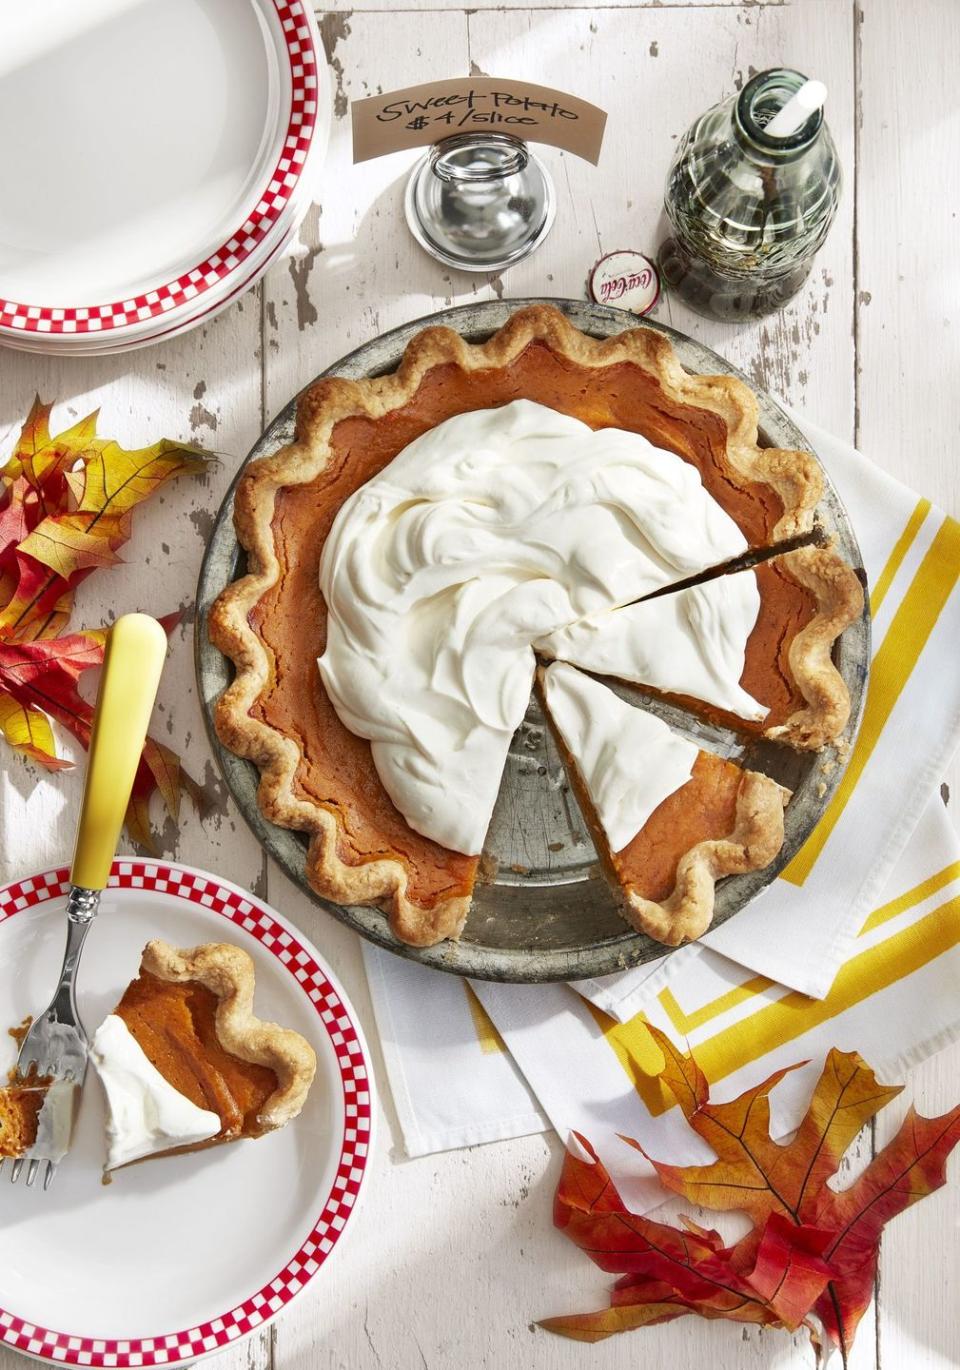 gingery sweet potato pie topped with whipped cream in a metal pie dish with a slice on a plate next to it